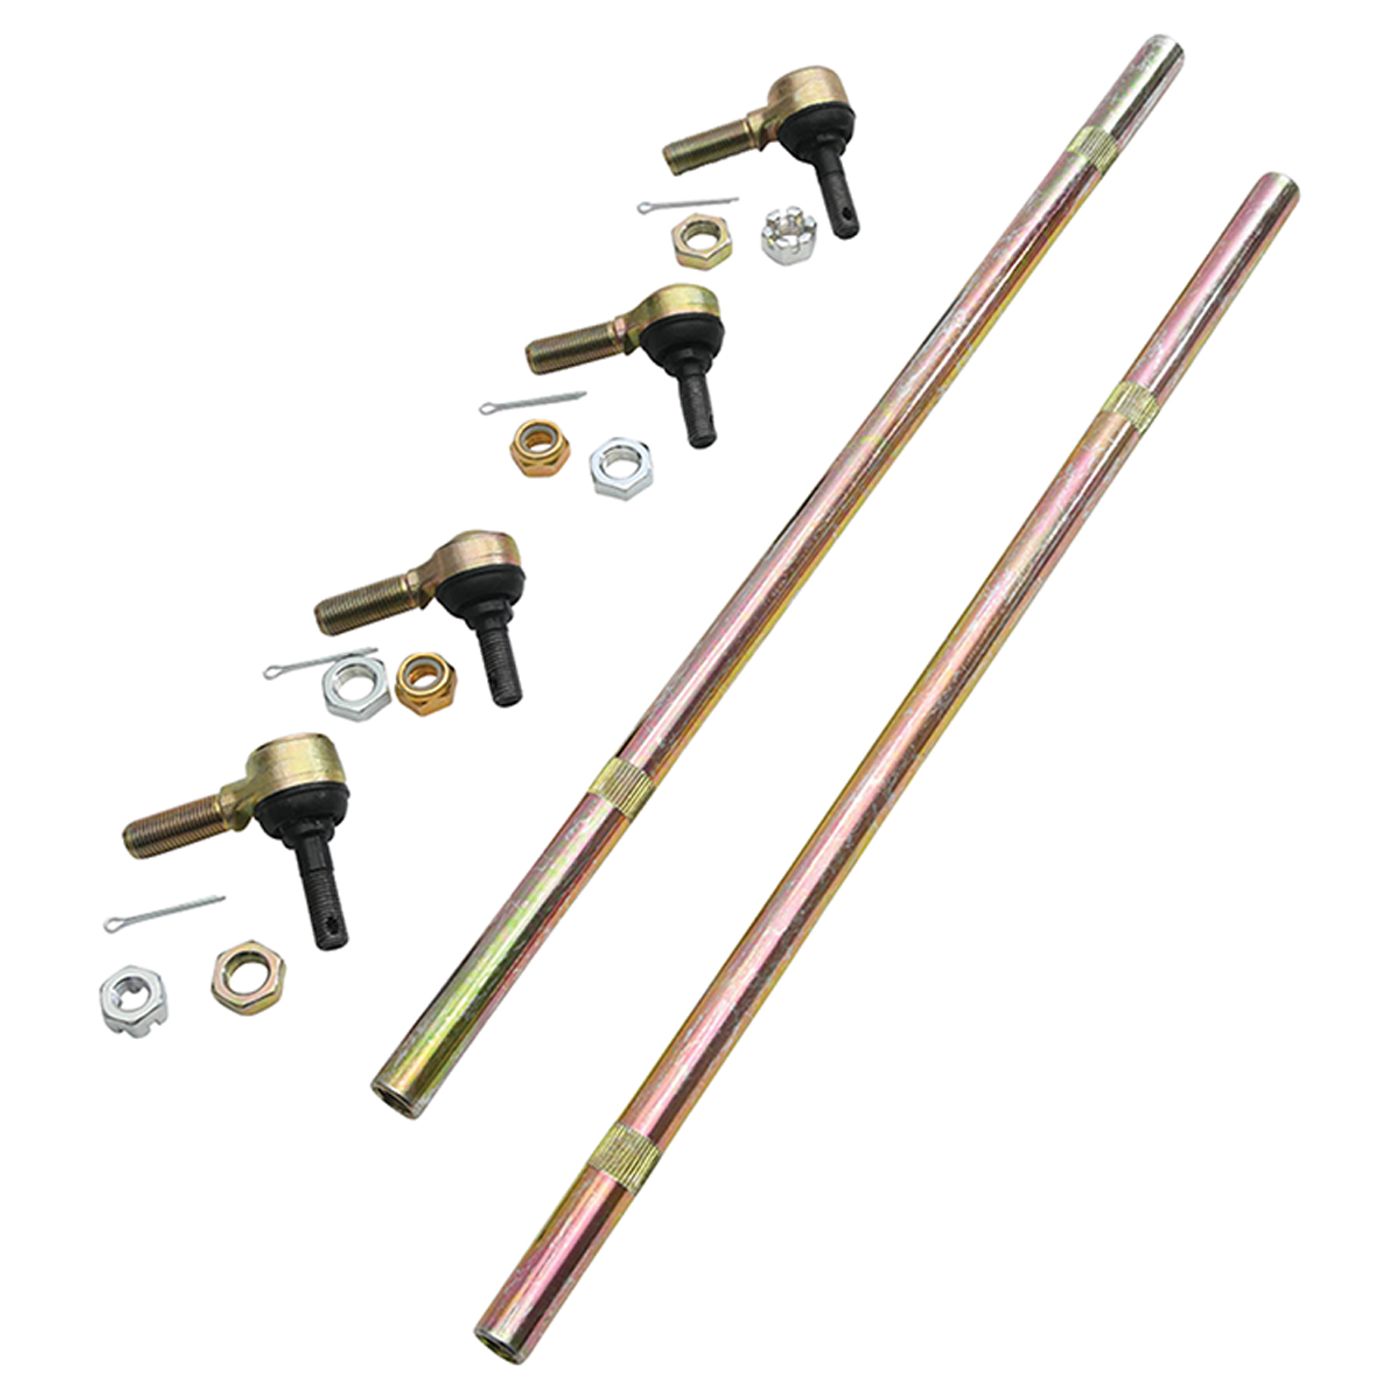 Wrp Tie Rod Kits - WRP521040 image